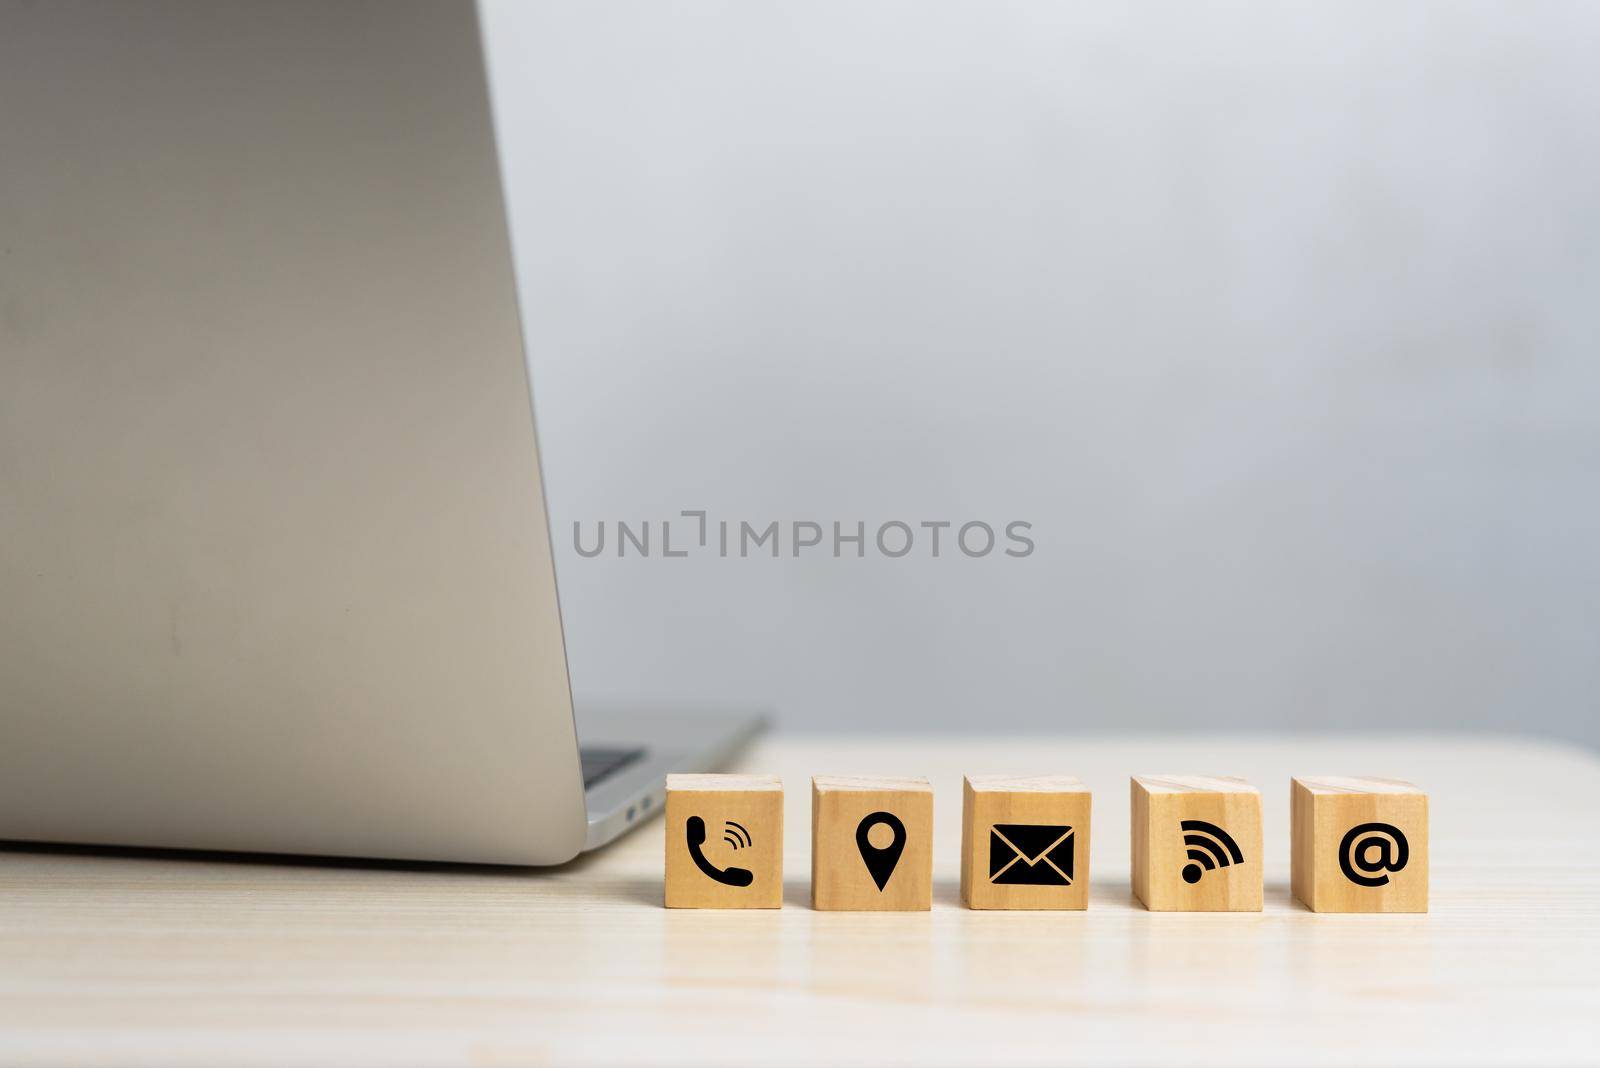 wood cube icon website page contact us or e-mail call phone, address, marketing concept on desk.